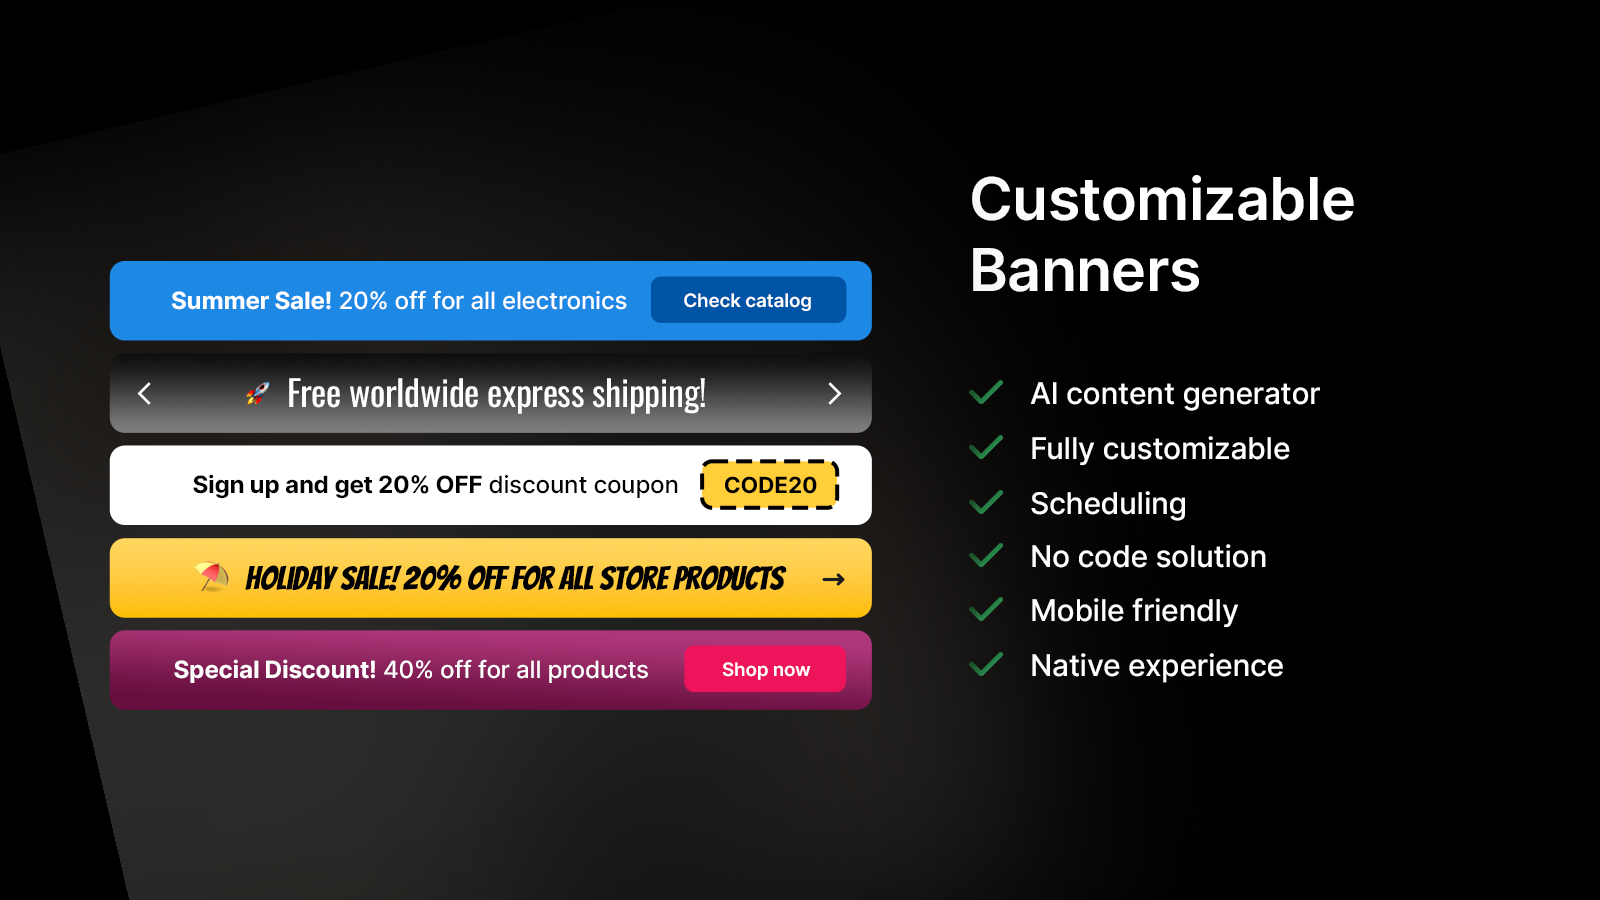 Customizable Banners - No Code, Scheduling and many more